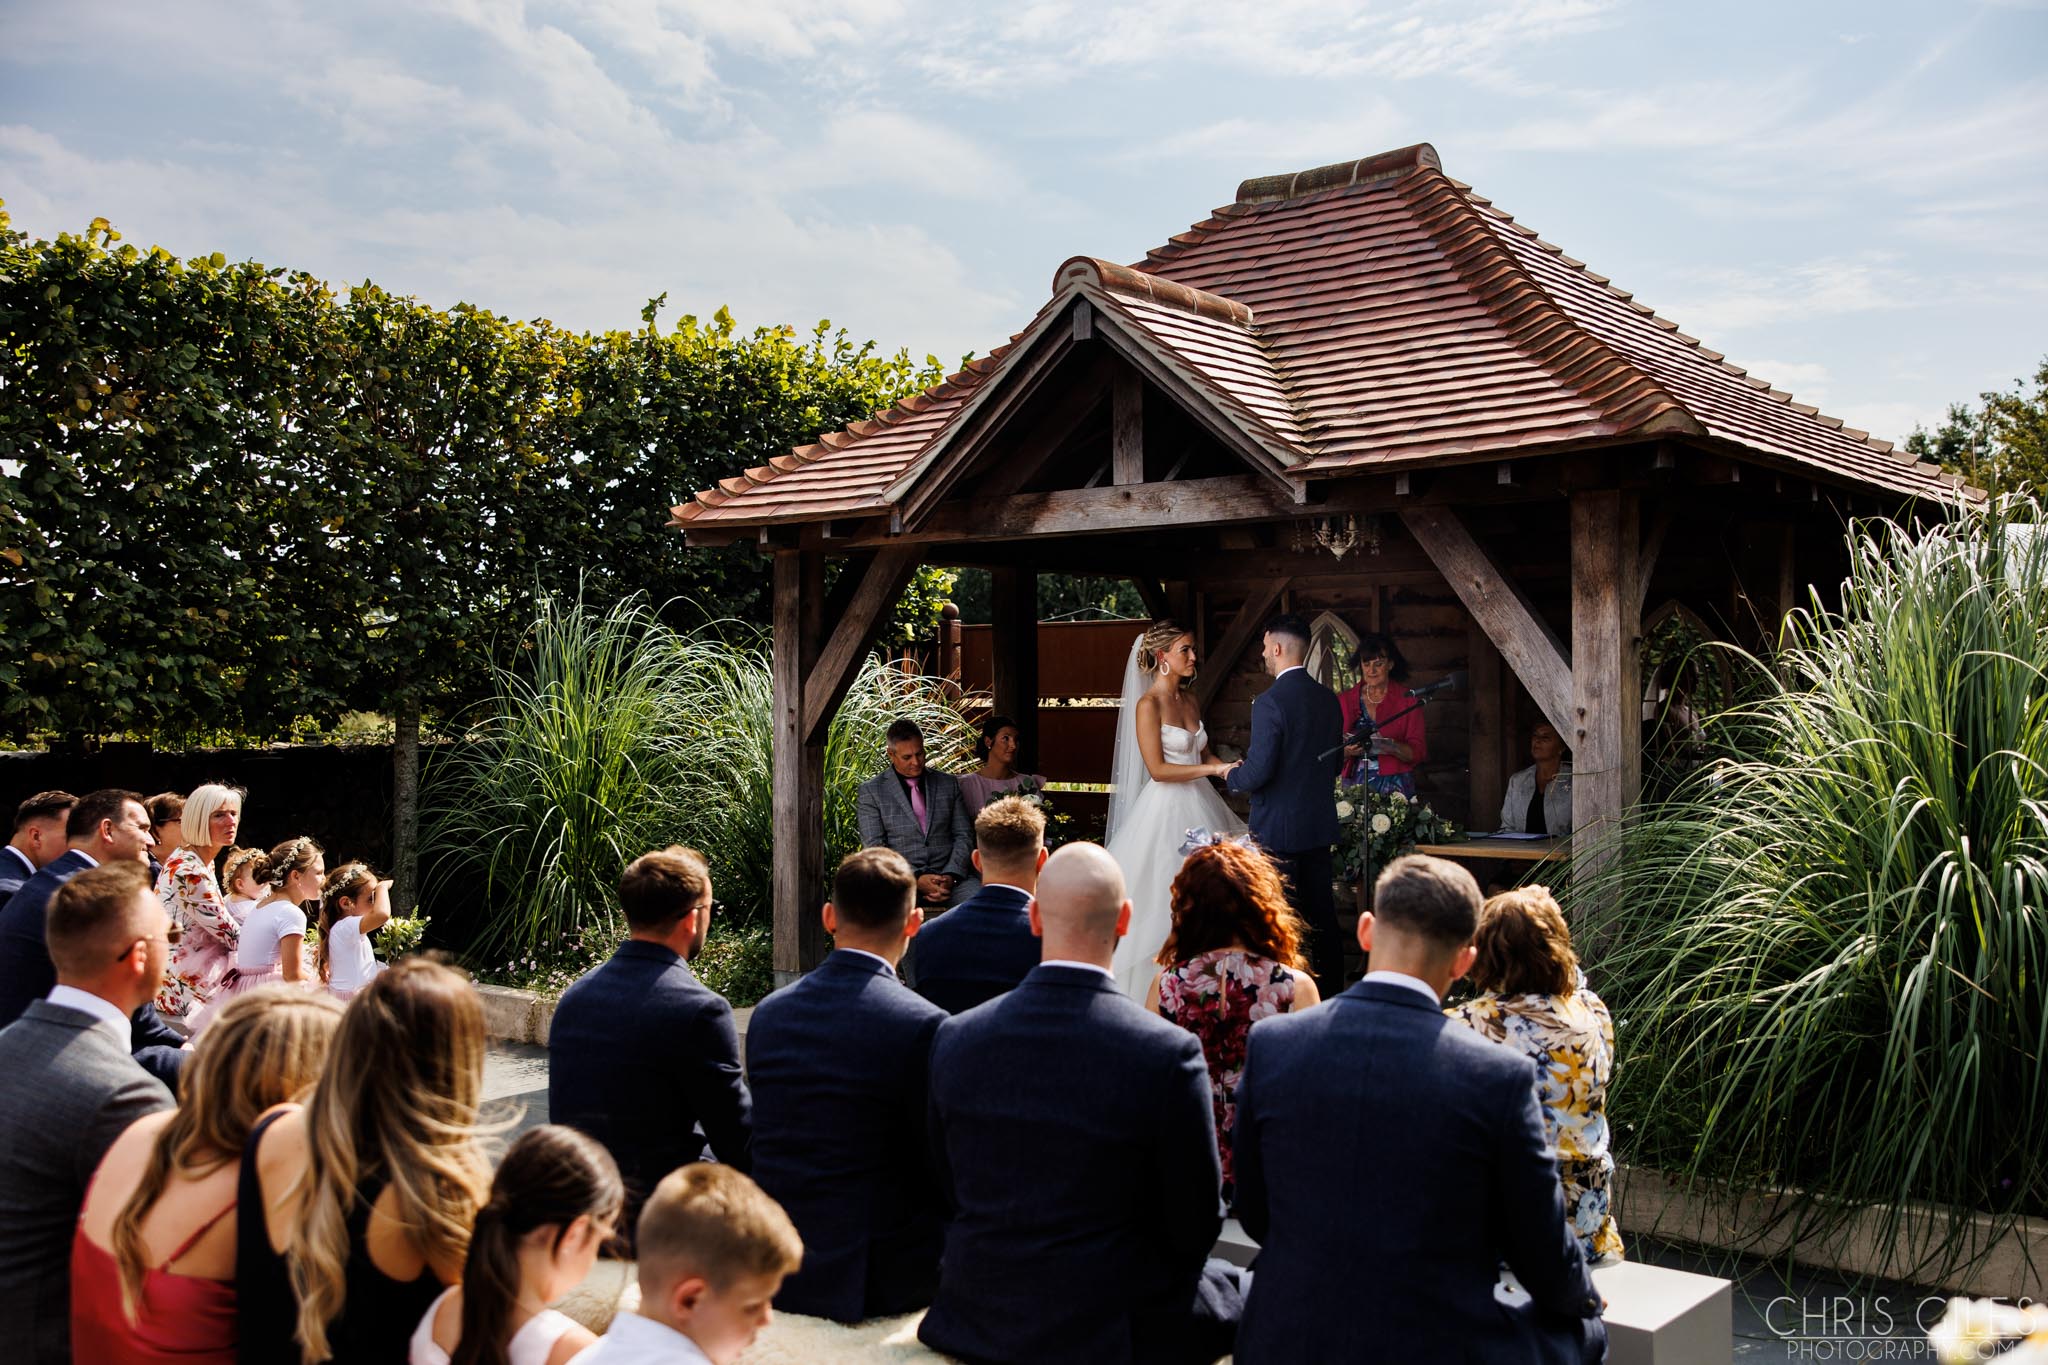 An outdoor ceremony at Southend Barns